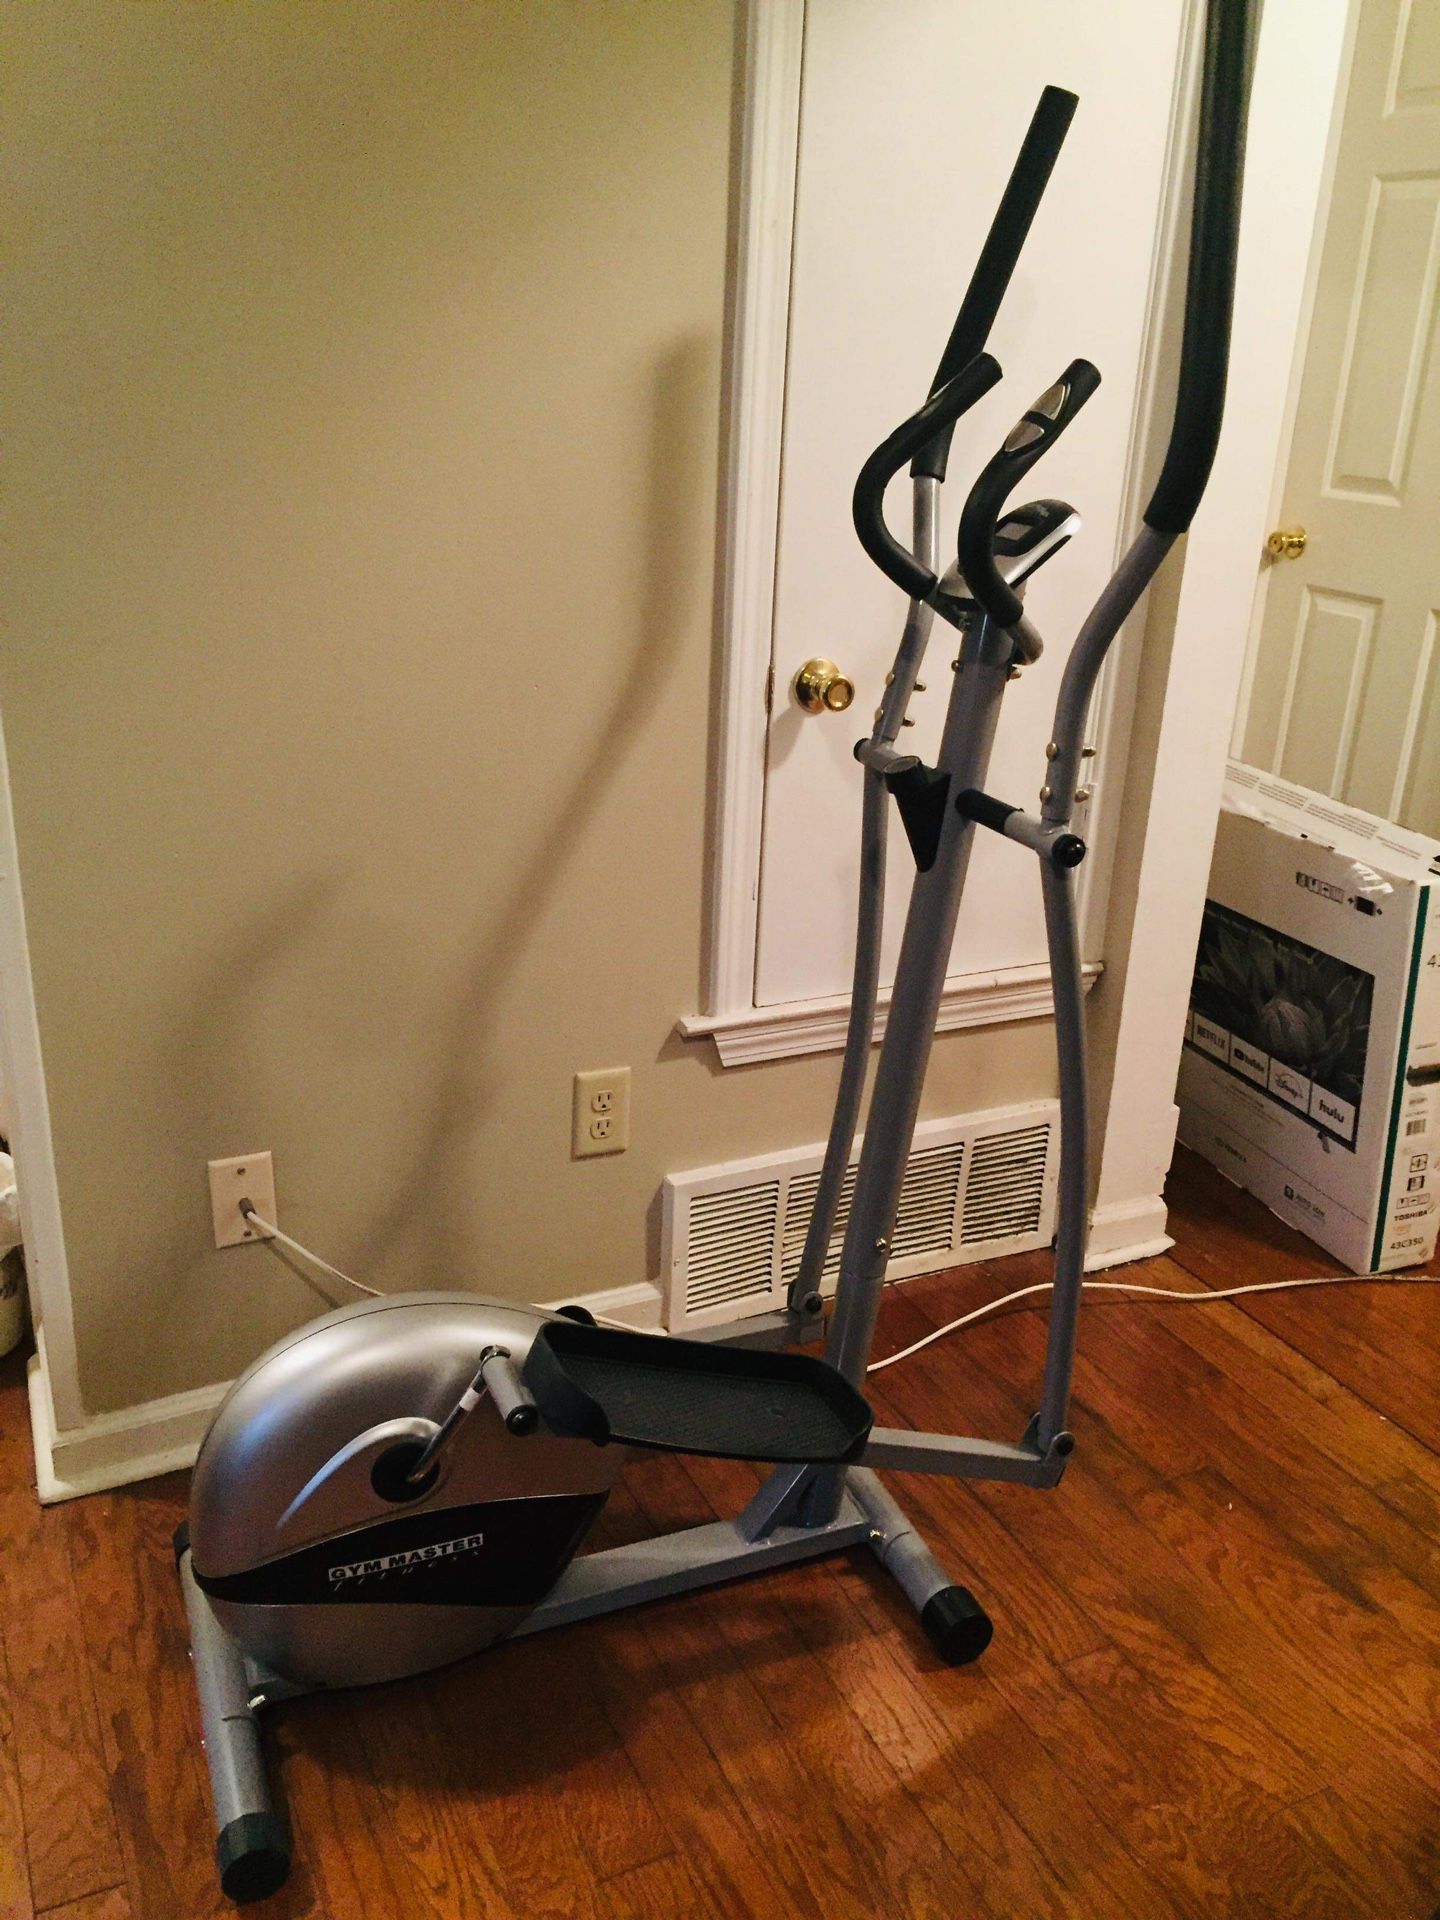 Elliptical by Gym Master Fitness